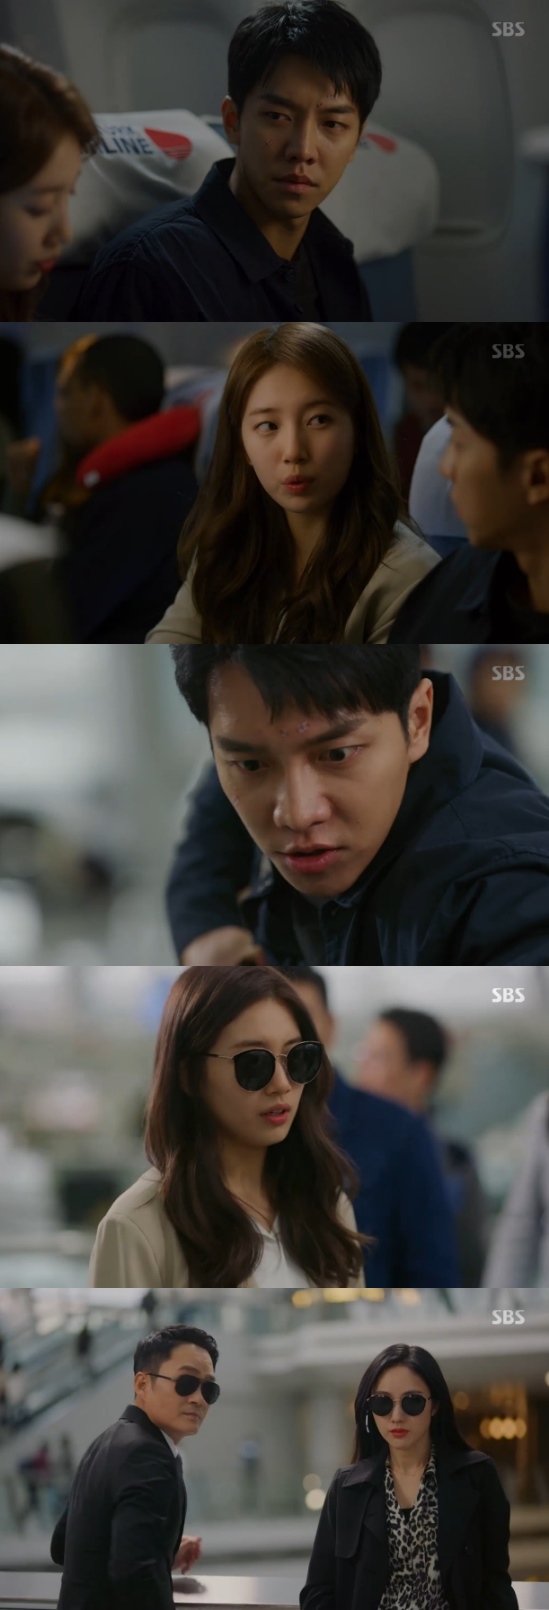 Vagabond Lee Seung-gi was almost attacked by a gunman as soon as he returned home.In the third episode of SBS gilt drama Vagabond, which was broadcast on the 27th, Cha Dal-gun (Lee Seung-gi), who shed tears all night in the death of his nephew, was portrayed.On the day, Bae Suzy heard voice records from the cockpit at the time of the Planes crash; Dr. It is unreasonable to preach a terror with only the phone details.We found more than 90% of the gas defect evidence. Do not give confusion. So he tried to find decisive evidence.Then he realized that the time Planes showed the signs of abnormality and the time in the phone records were consistent.He told the doctor he would go home and send him a video of the terror, but the man broke into the house.The confession, who overpowered the gunman, told him to call the person who had ordered him to kill him, who was the former Ryi of the Gohari (Yoon Na-mu).He informed Cha Dal-gun, who received a call instead of a surgery, that he was in a relationship with a terro.They followed Hosik, but Hosik killed himself, saying he would protect his family. There was a shooter targeting them.Those are scary people, he warned.Later, Gohari told Lee Ki-young that the Planes accident was a terror.Kang Ju-cheol reported at the Baro meeting, and the NIS chief ordered Ko Hae-ri to return to Baro.Chadalgan told the Confessor that he would not leave Morocco until he caught the terror. Youre going to Seoul to reveal that now. You cant do anything here.Our lives are at risk right now. Korea is not so poor. The NIS will officially investigate, so dont worry. Go to Seoul.When the confession and the chadalgun on the Return home road continued to suffer from Huns death, the confession said, I know what youre feeling. Im sorry for Hun.However, the NIS chief told Ki Tae-woong (Shin Sung-rok) and Min Jae-sik (Jung Man-sik) to cover the case, and Jessica Lee (Moon Jung-hee) was also targeting them.Jessica Lee planned to attack Chadal Gun as soon as he arrived at Incheon International Airport, but the dangerous Chadal Gun overpowered the gunman.Photo = SBS Broadcasting Screen